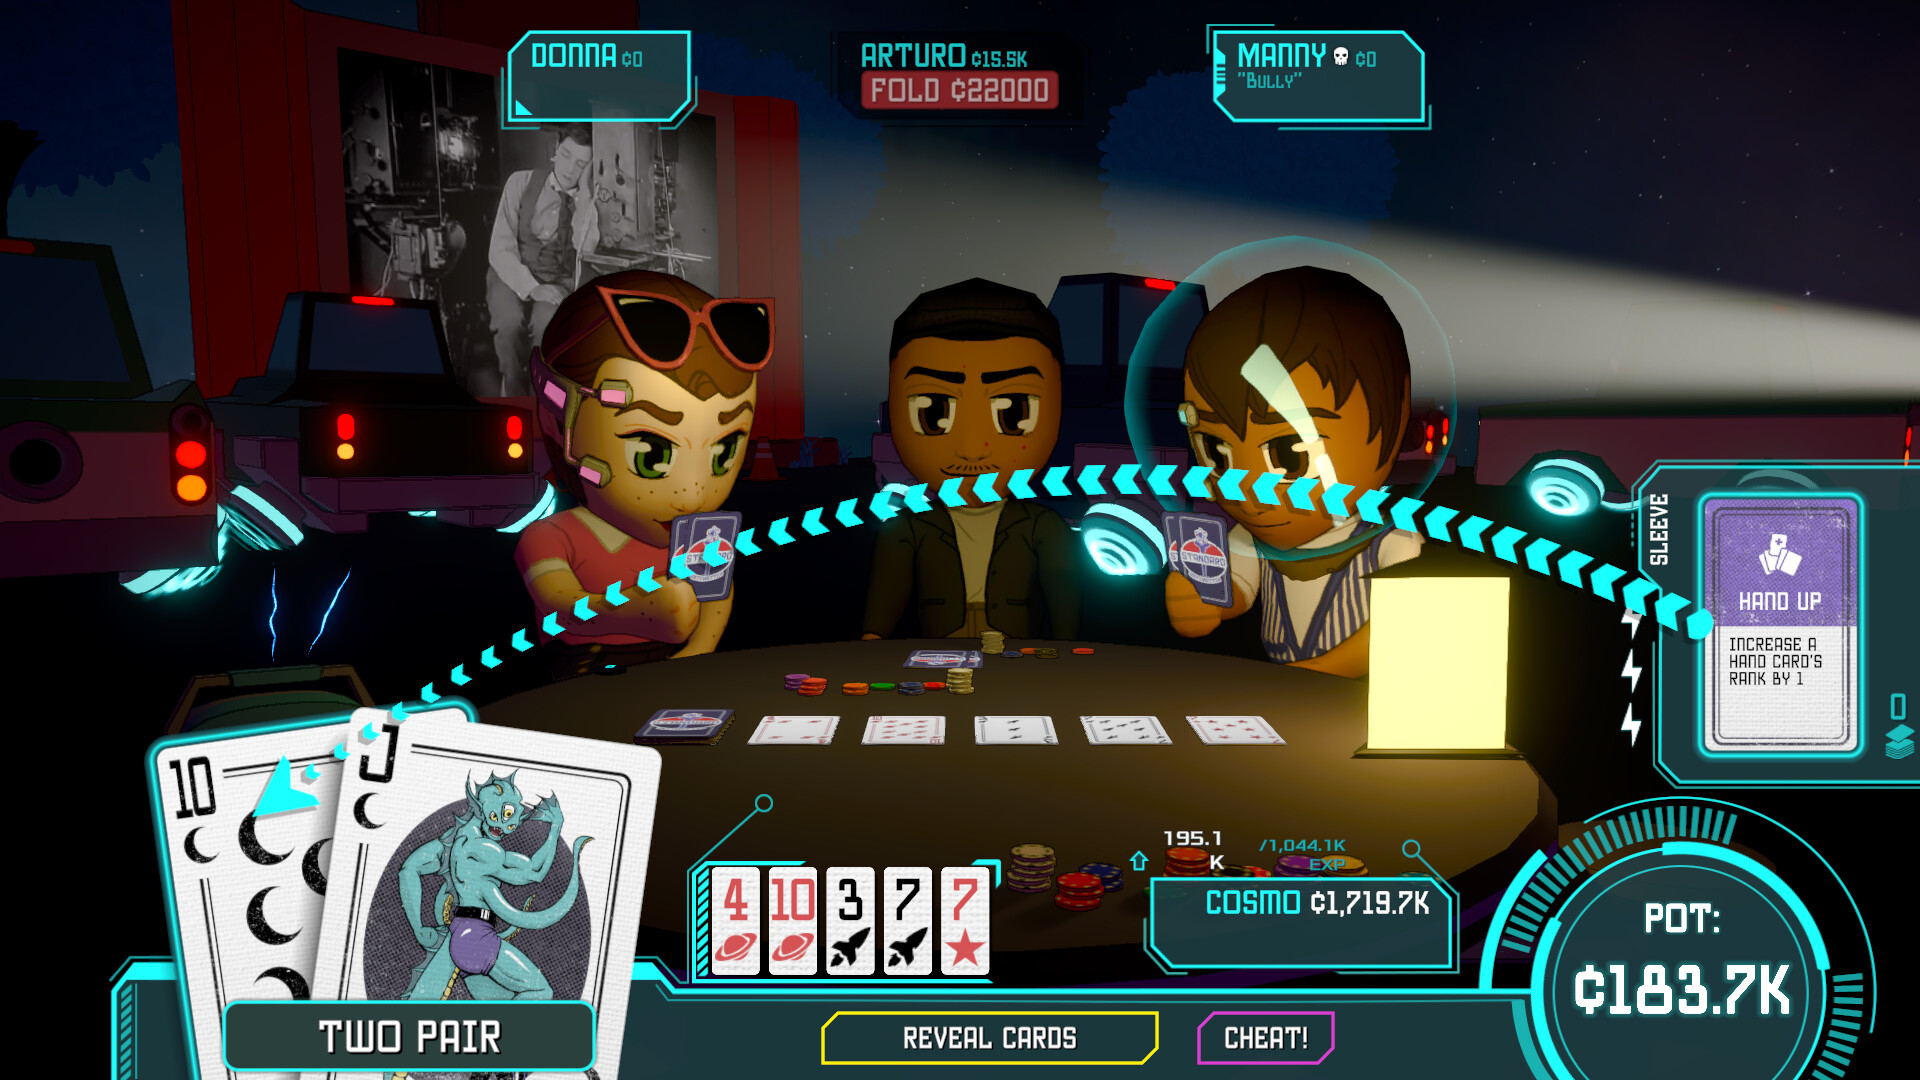 Cosmo Cheats at Poker Steam CD Key, 5.54$